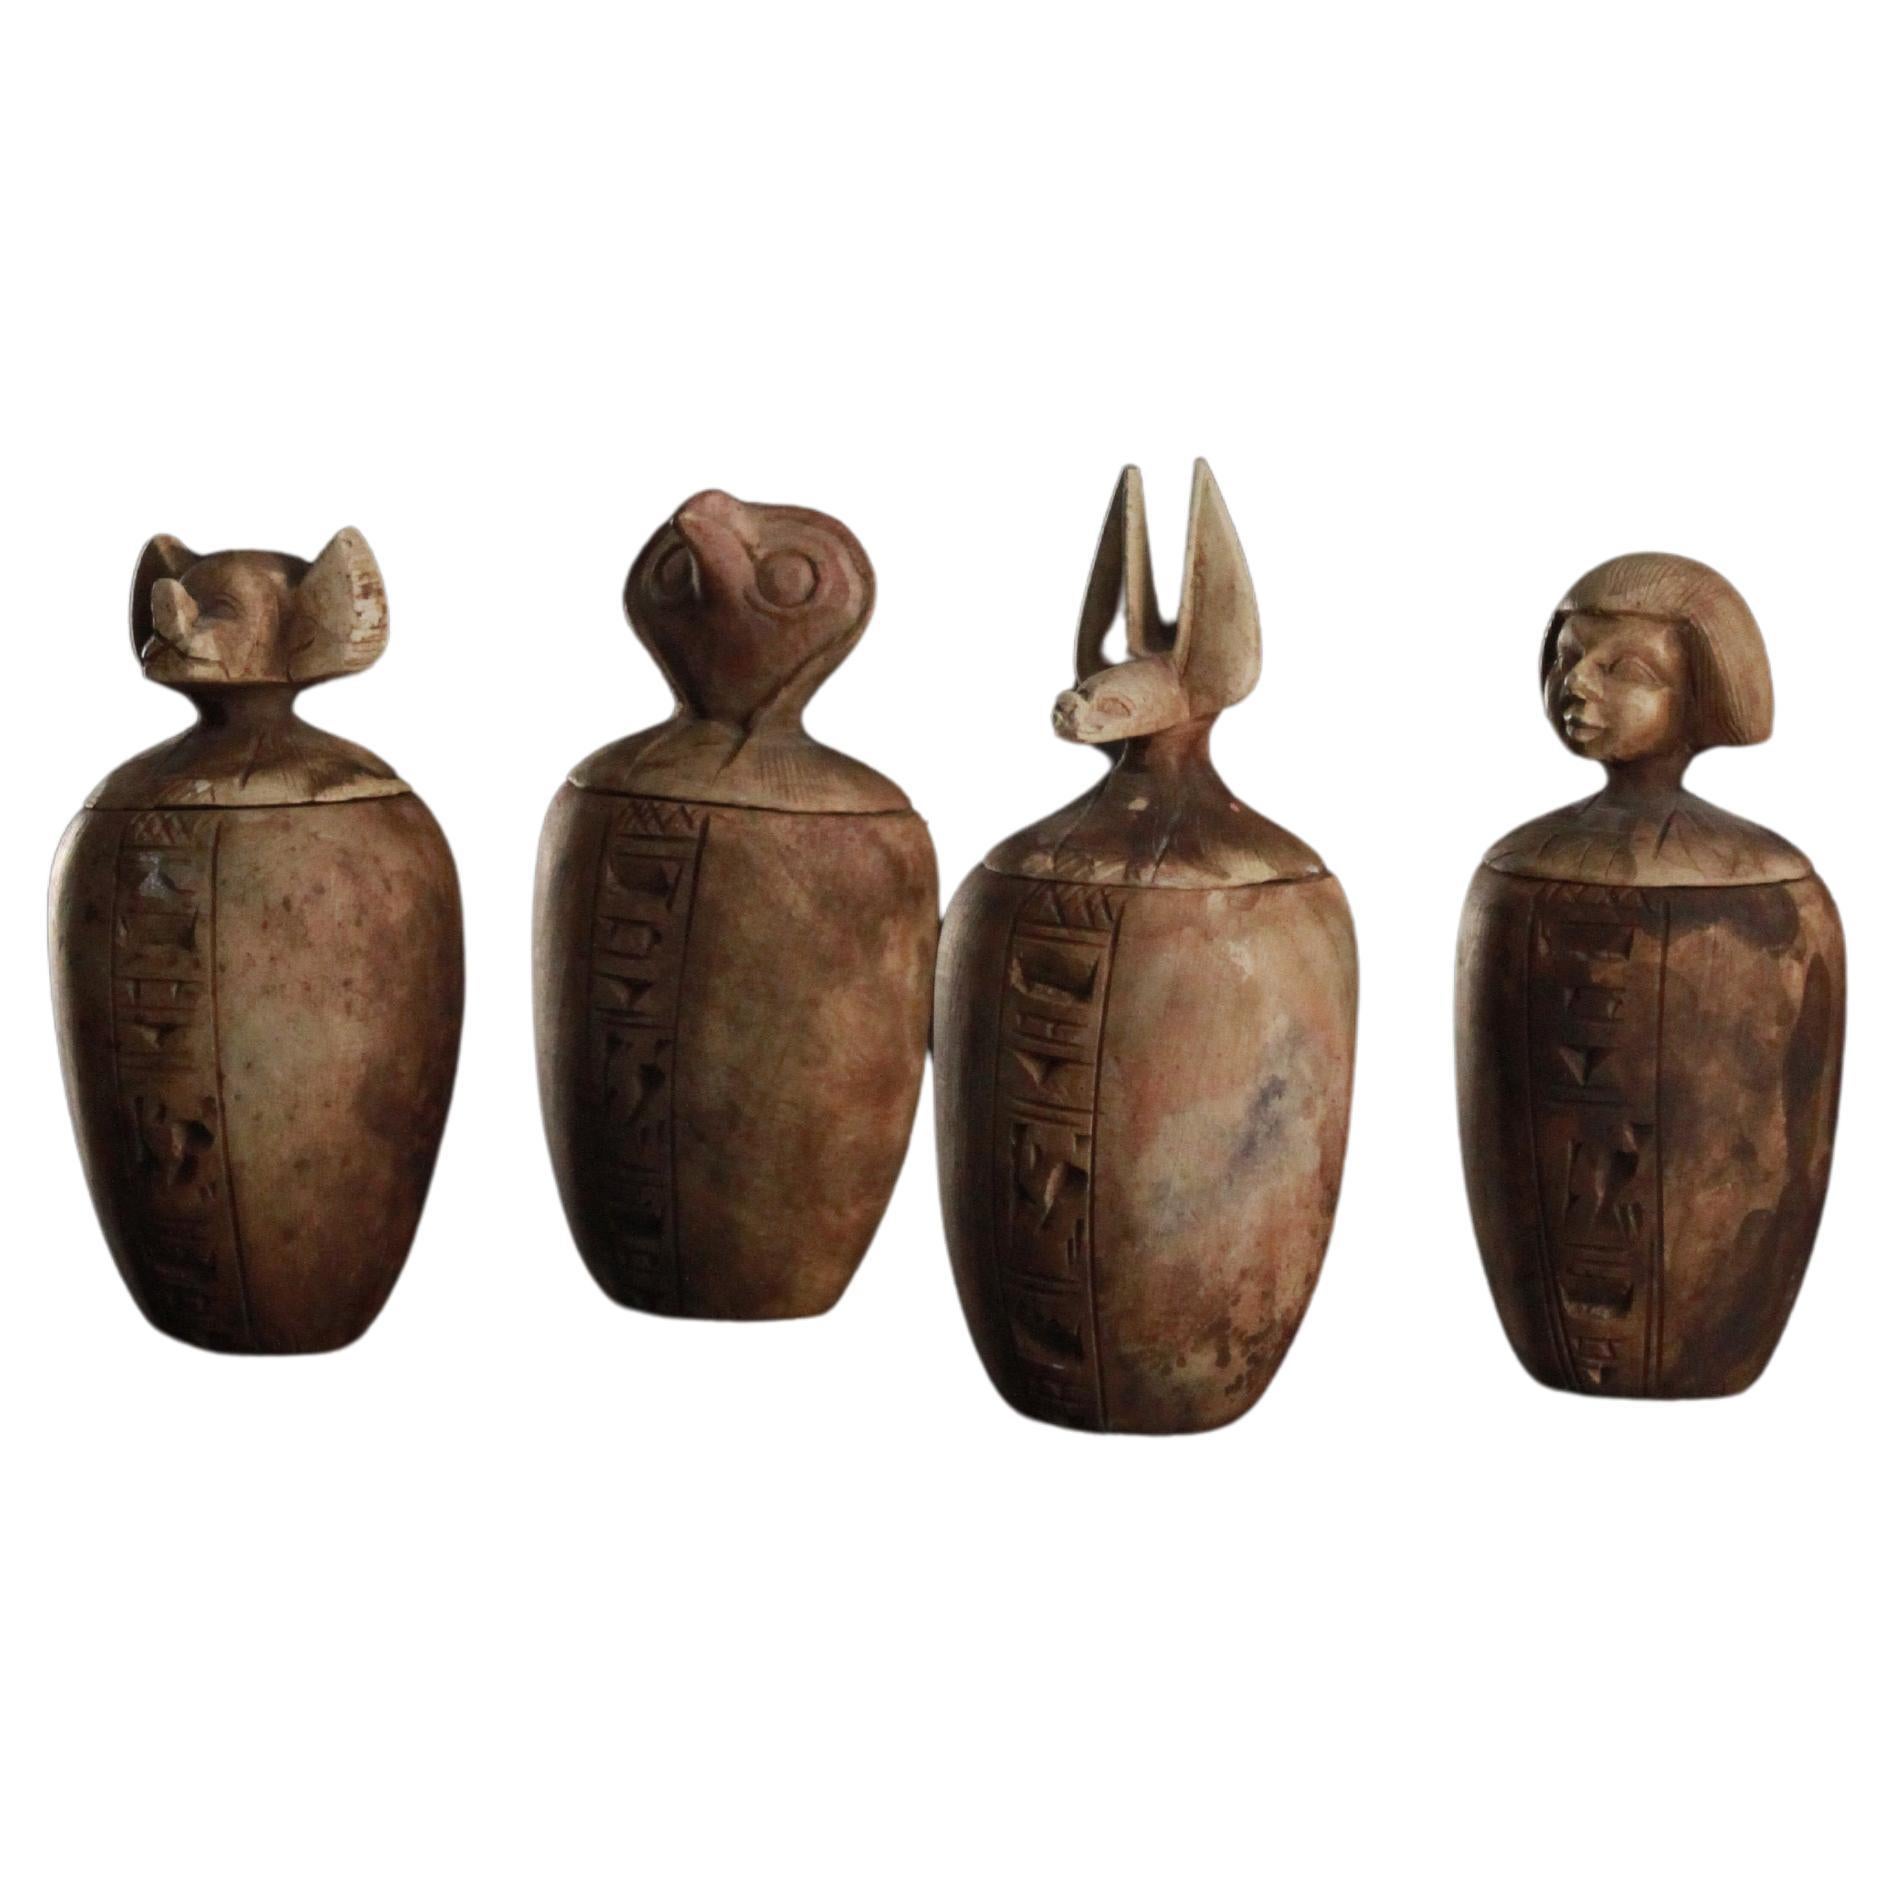 Unique Egyptian Art Set of 4 Canopic Jars Made of Limestone